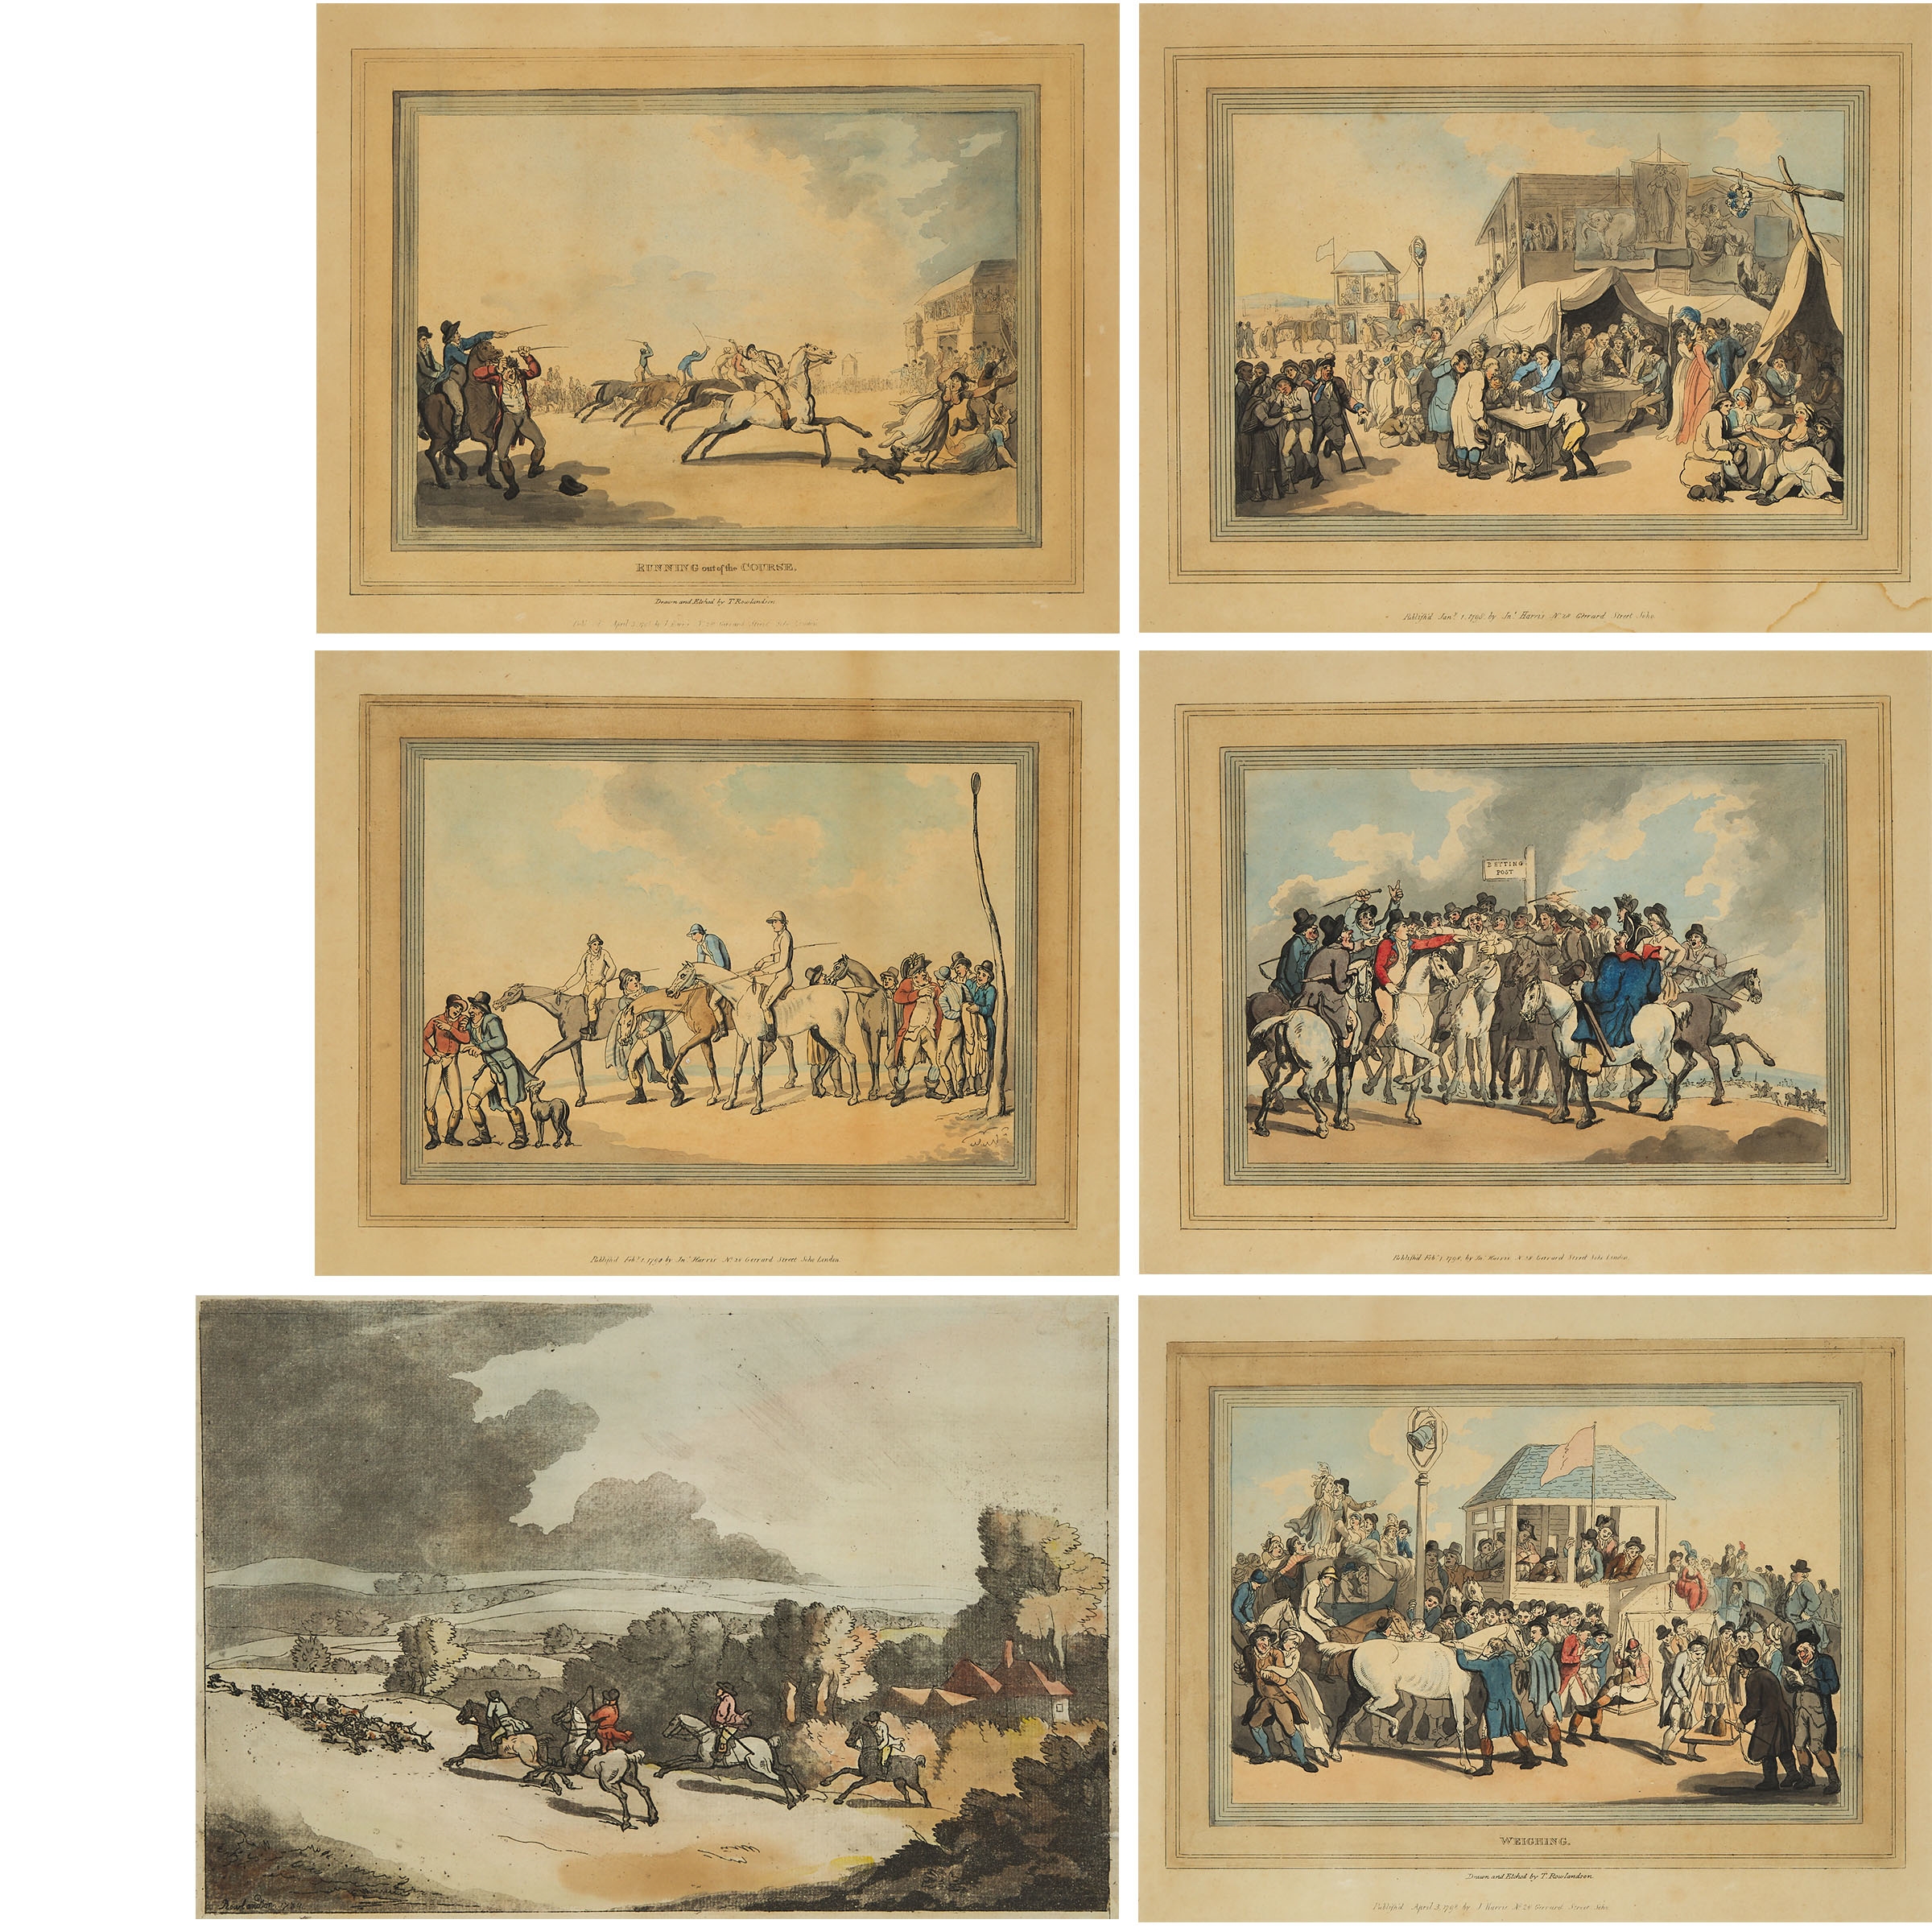 SIX PRINTS, INCLUDING FIVE PRINTS FROM THE RACING SERIES, 1798; AND A HUNTING SCENE by Thomas Rowlandson, 1798